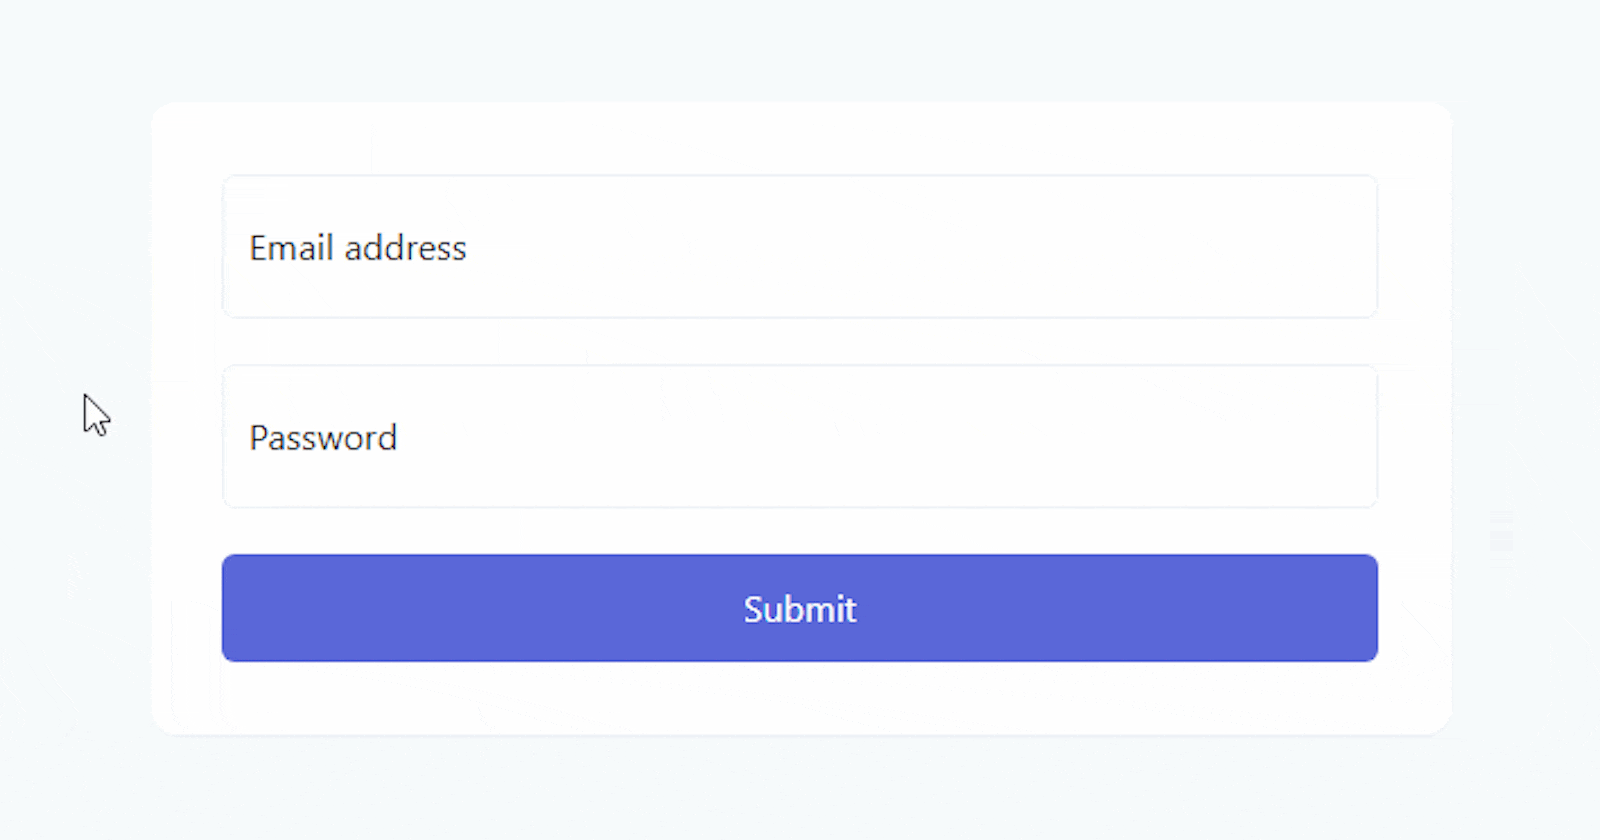 Creating a Floating Label Input form using TailwindCSS (No Javascript)